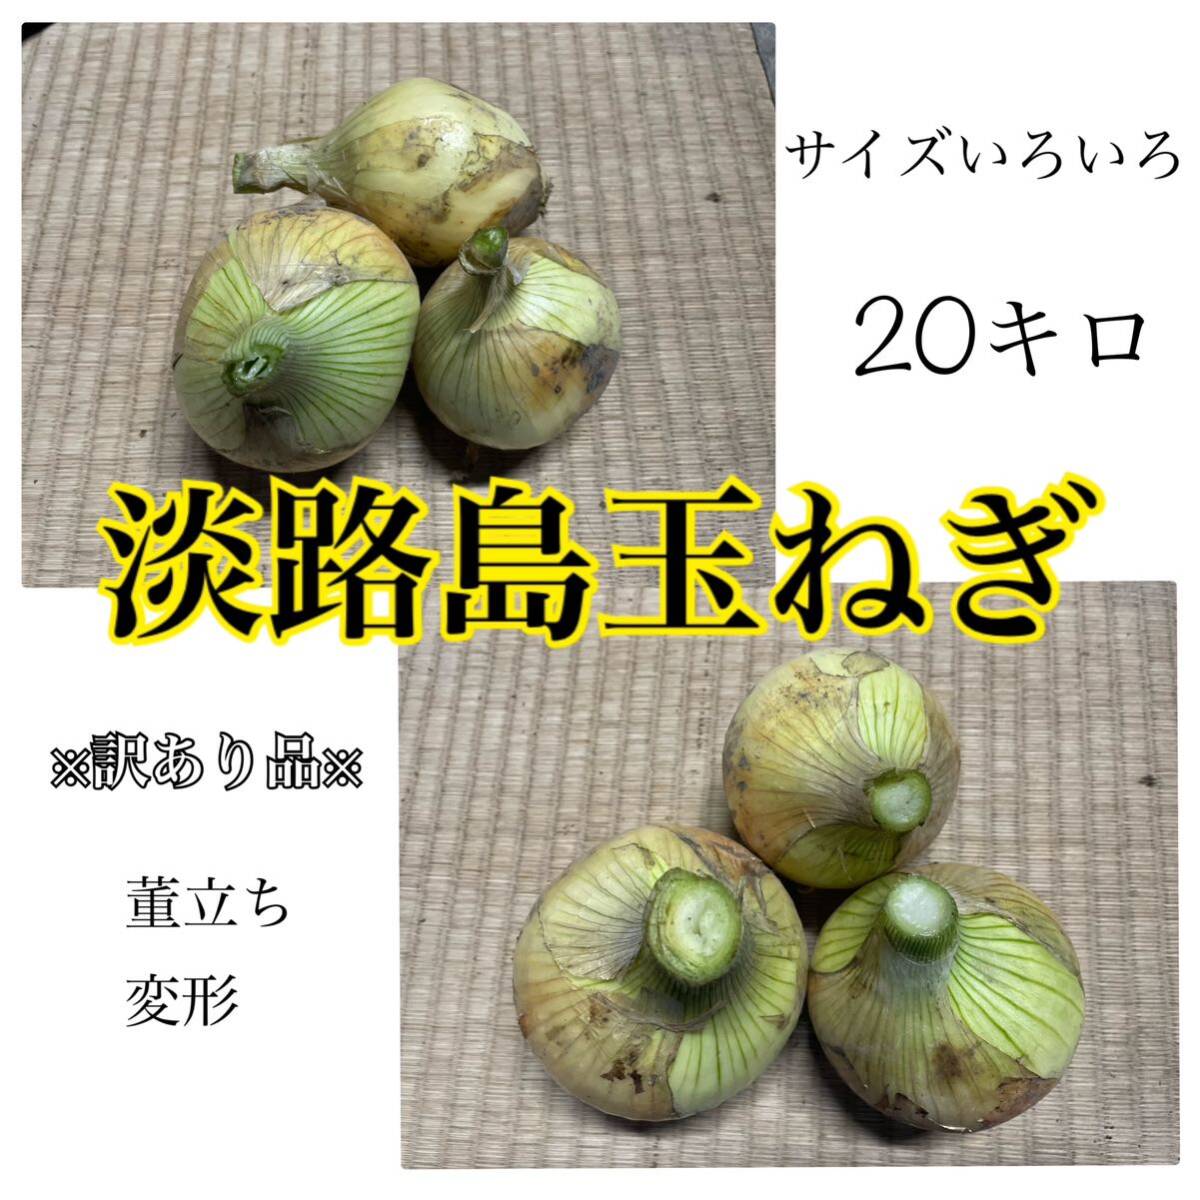 [ goods with special circumstances ] Awaji Island sphere leek new tama welsh onion new onion the 7 treasures processing etc. new sphere leek new onion 20 kilo affordable goods 